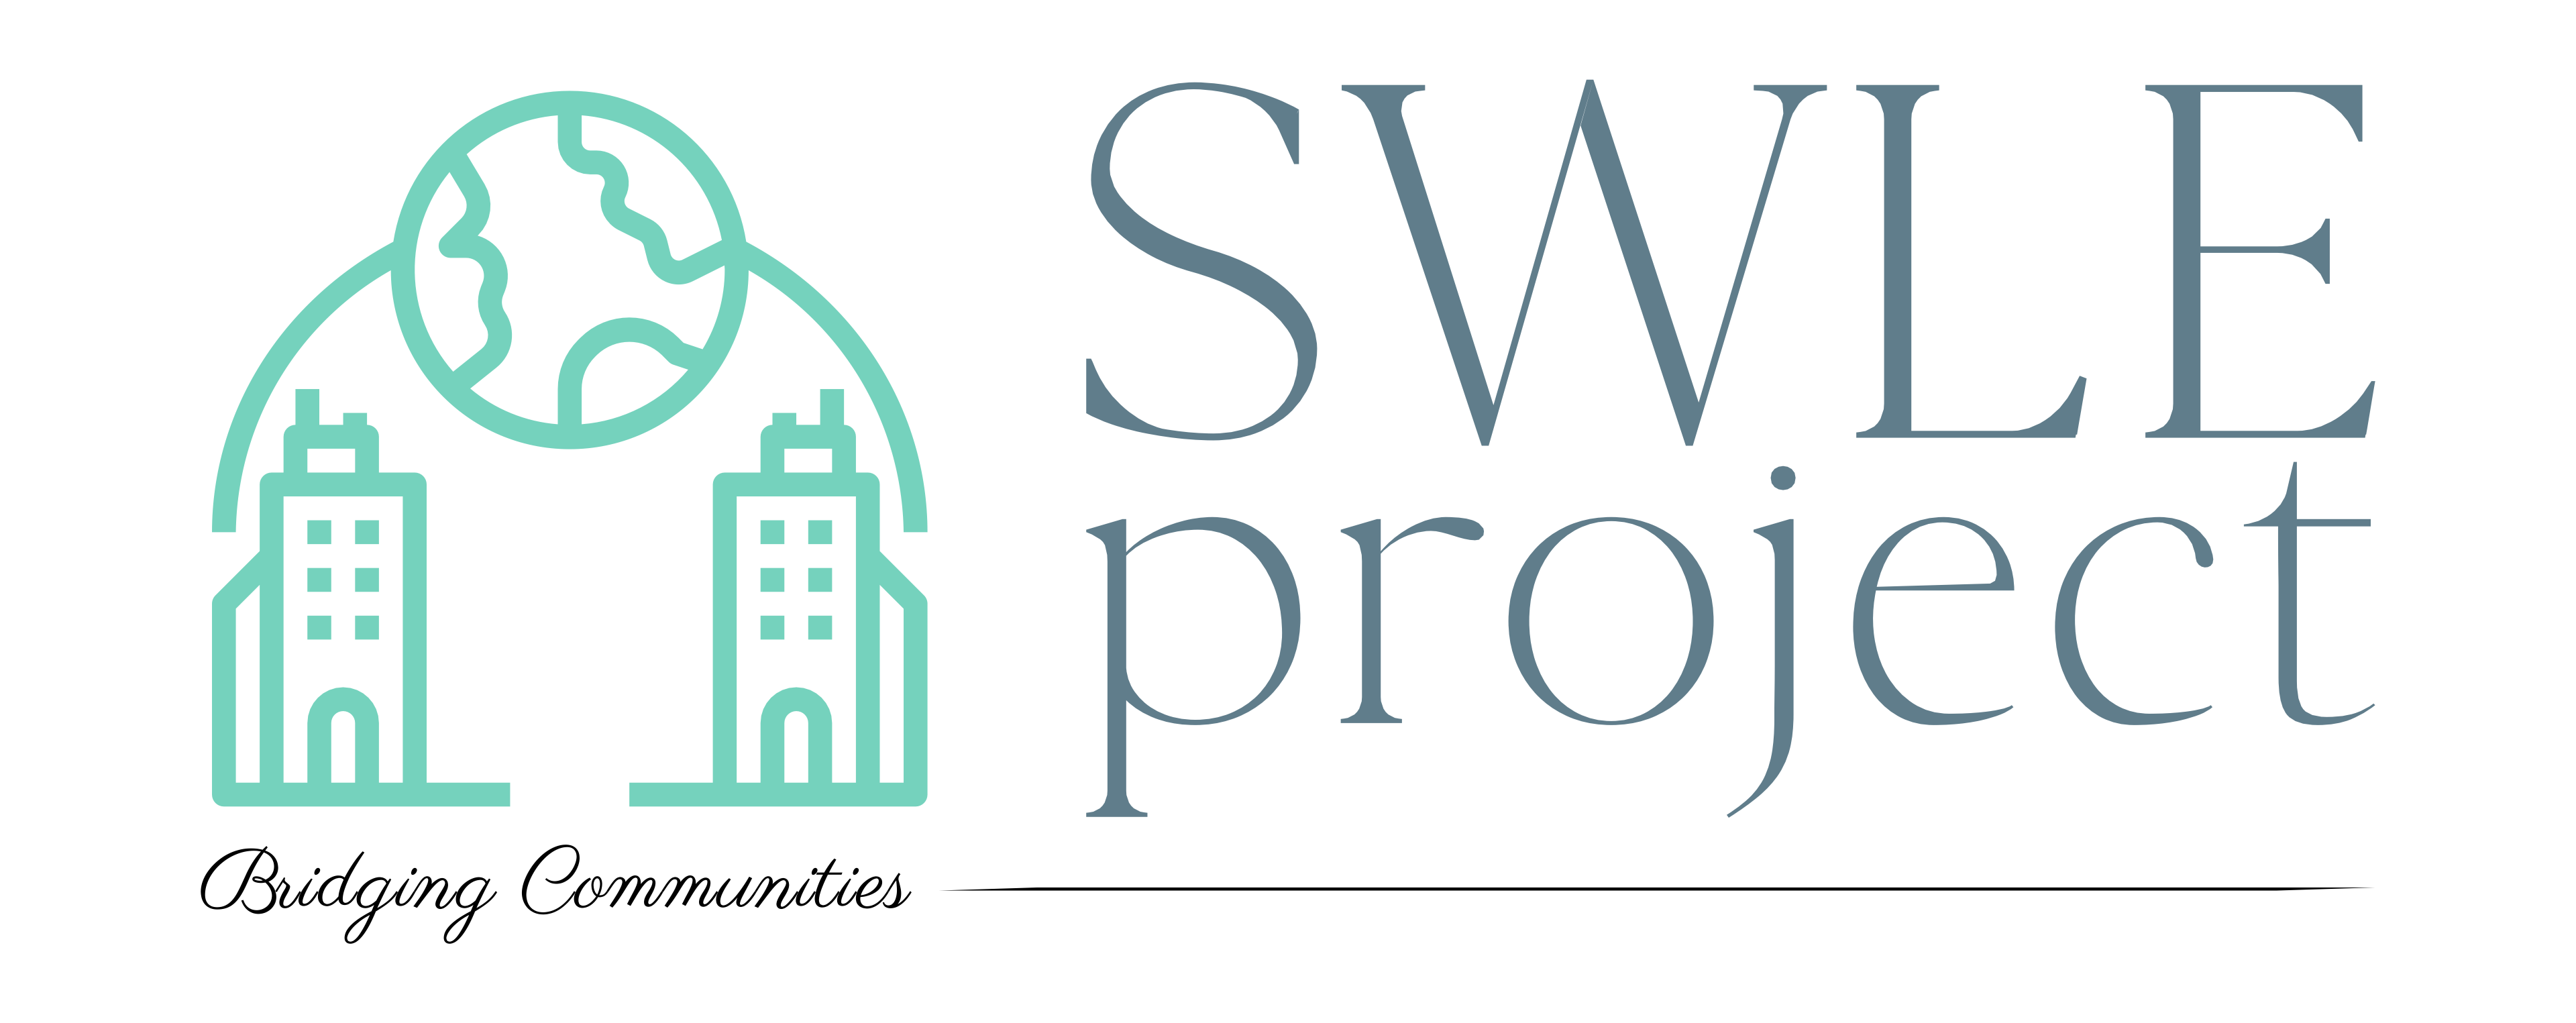 SWLE Project